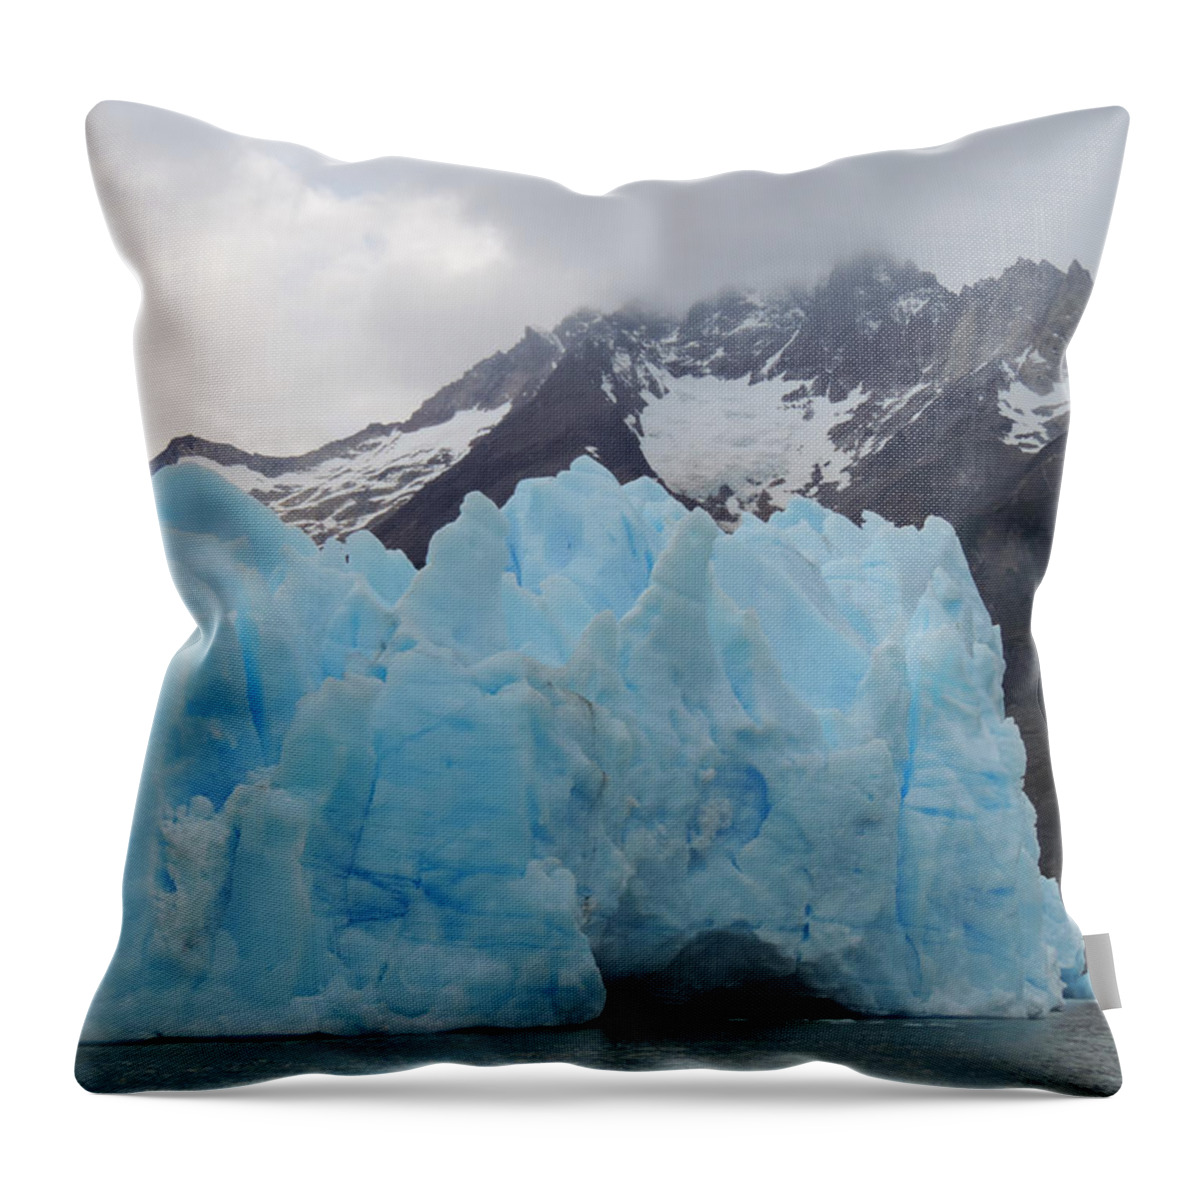 Photograph Throw Pillow featuring the photograph Glacier Blue by Richard Gehlbach